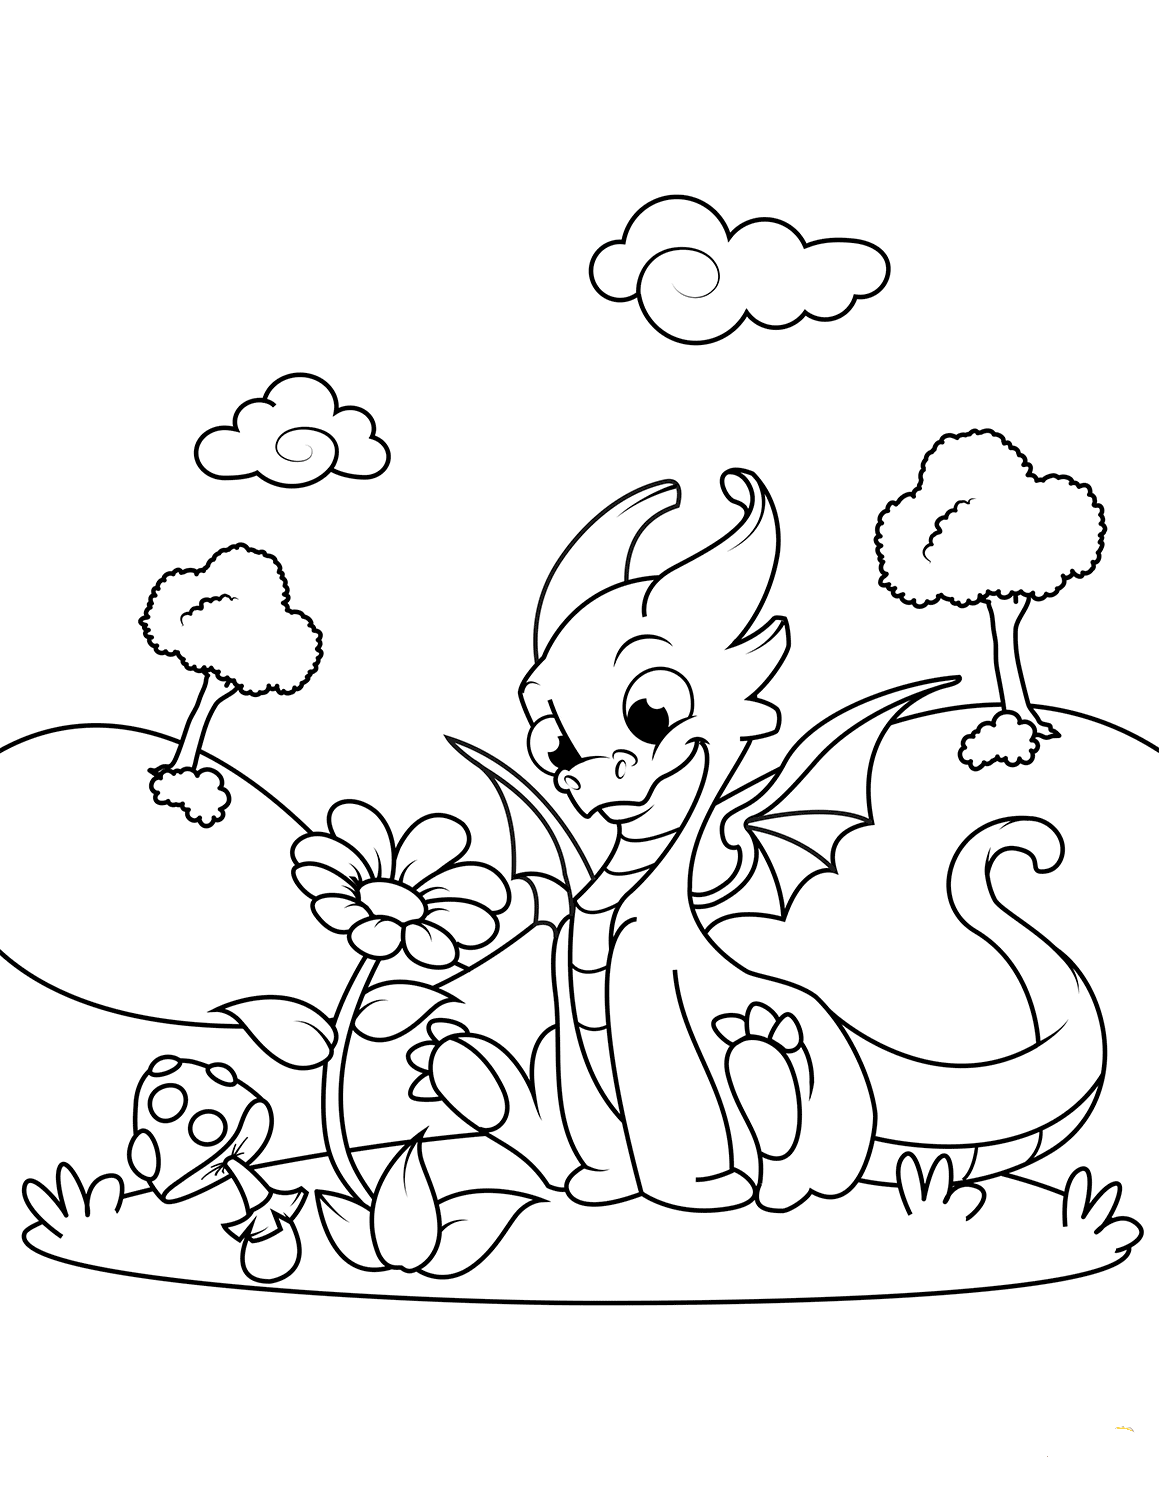 free coloring pages dragons dragon coloring pages for adults best coloring pages for coloring pages free dragons 